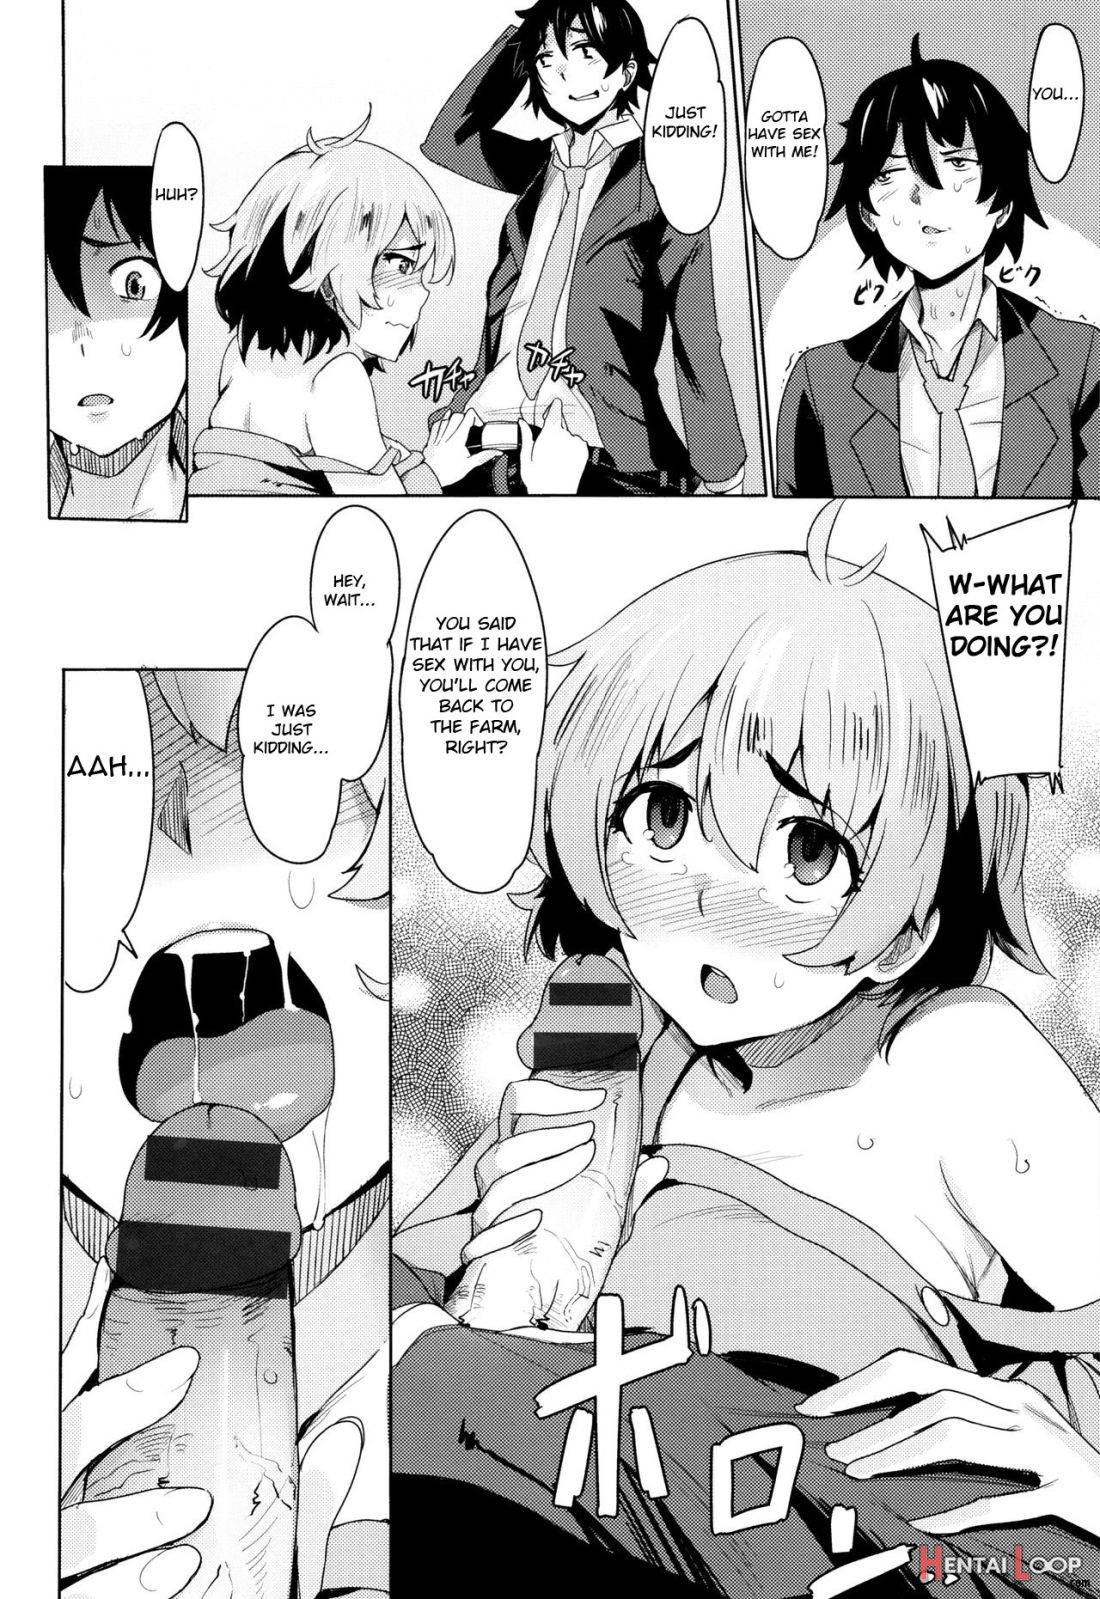 Slap❤love Attack page 6